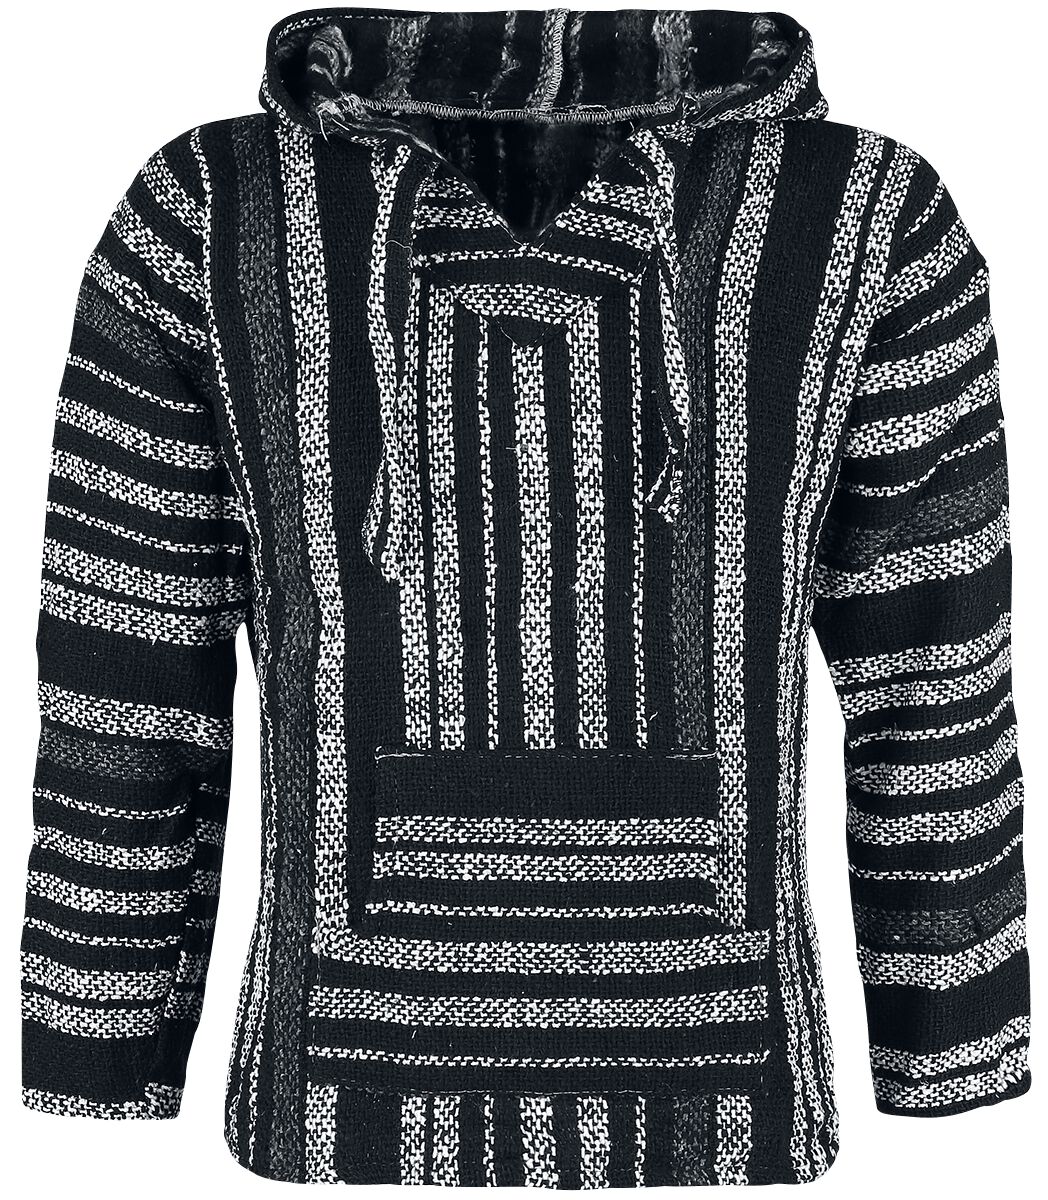 Rock Daddy Mexican Hood Hooded sweater black grey